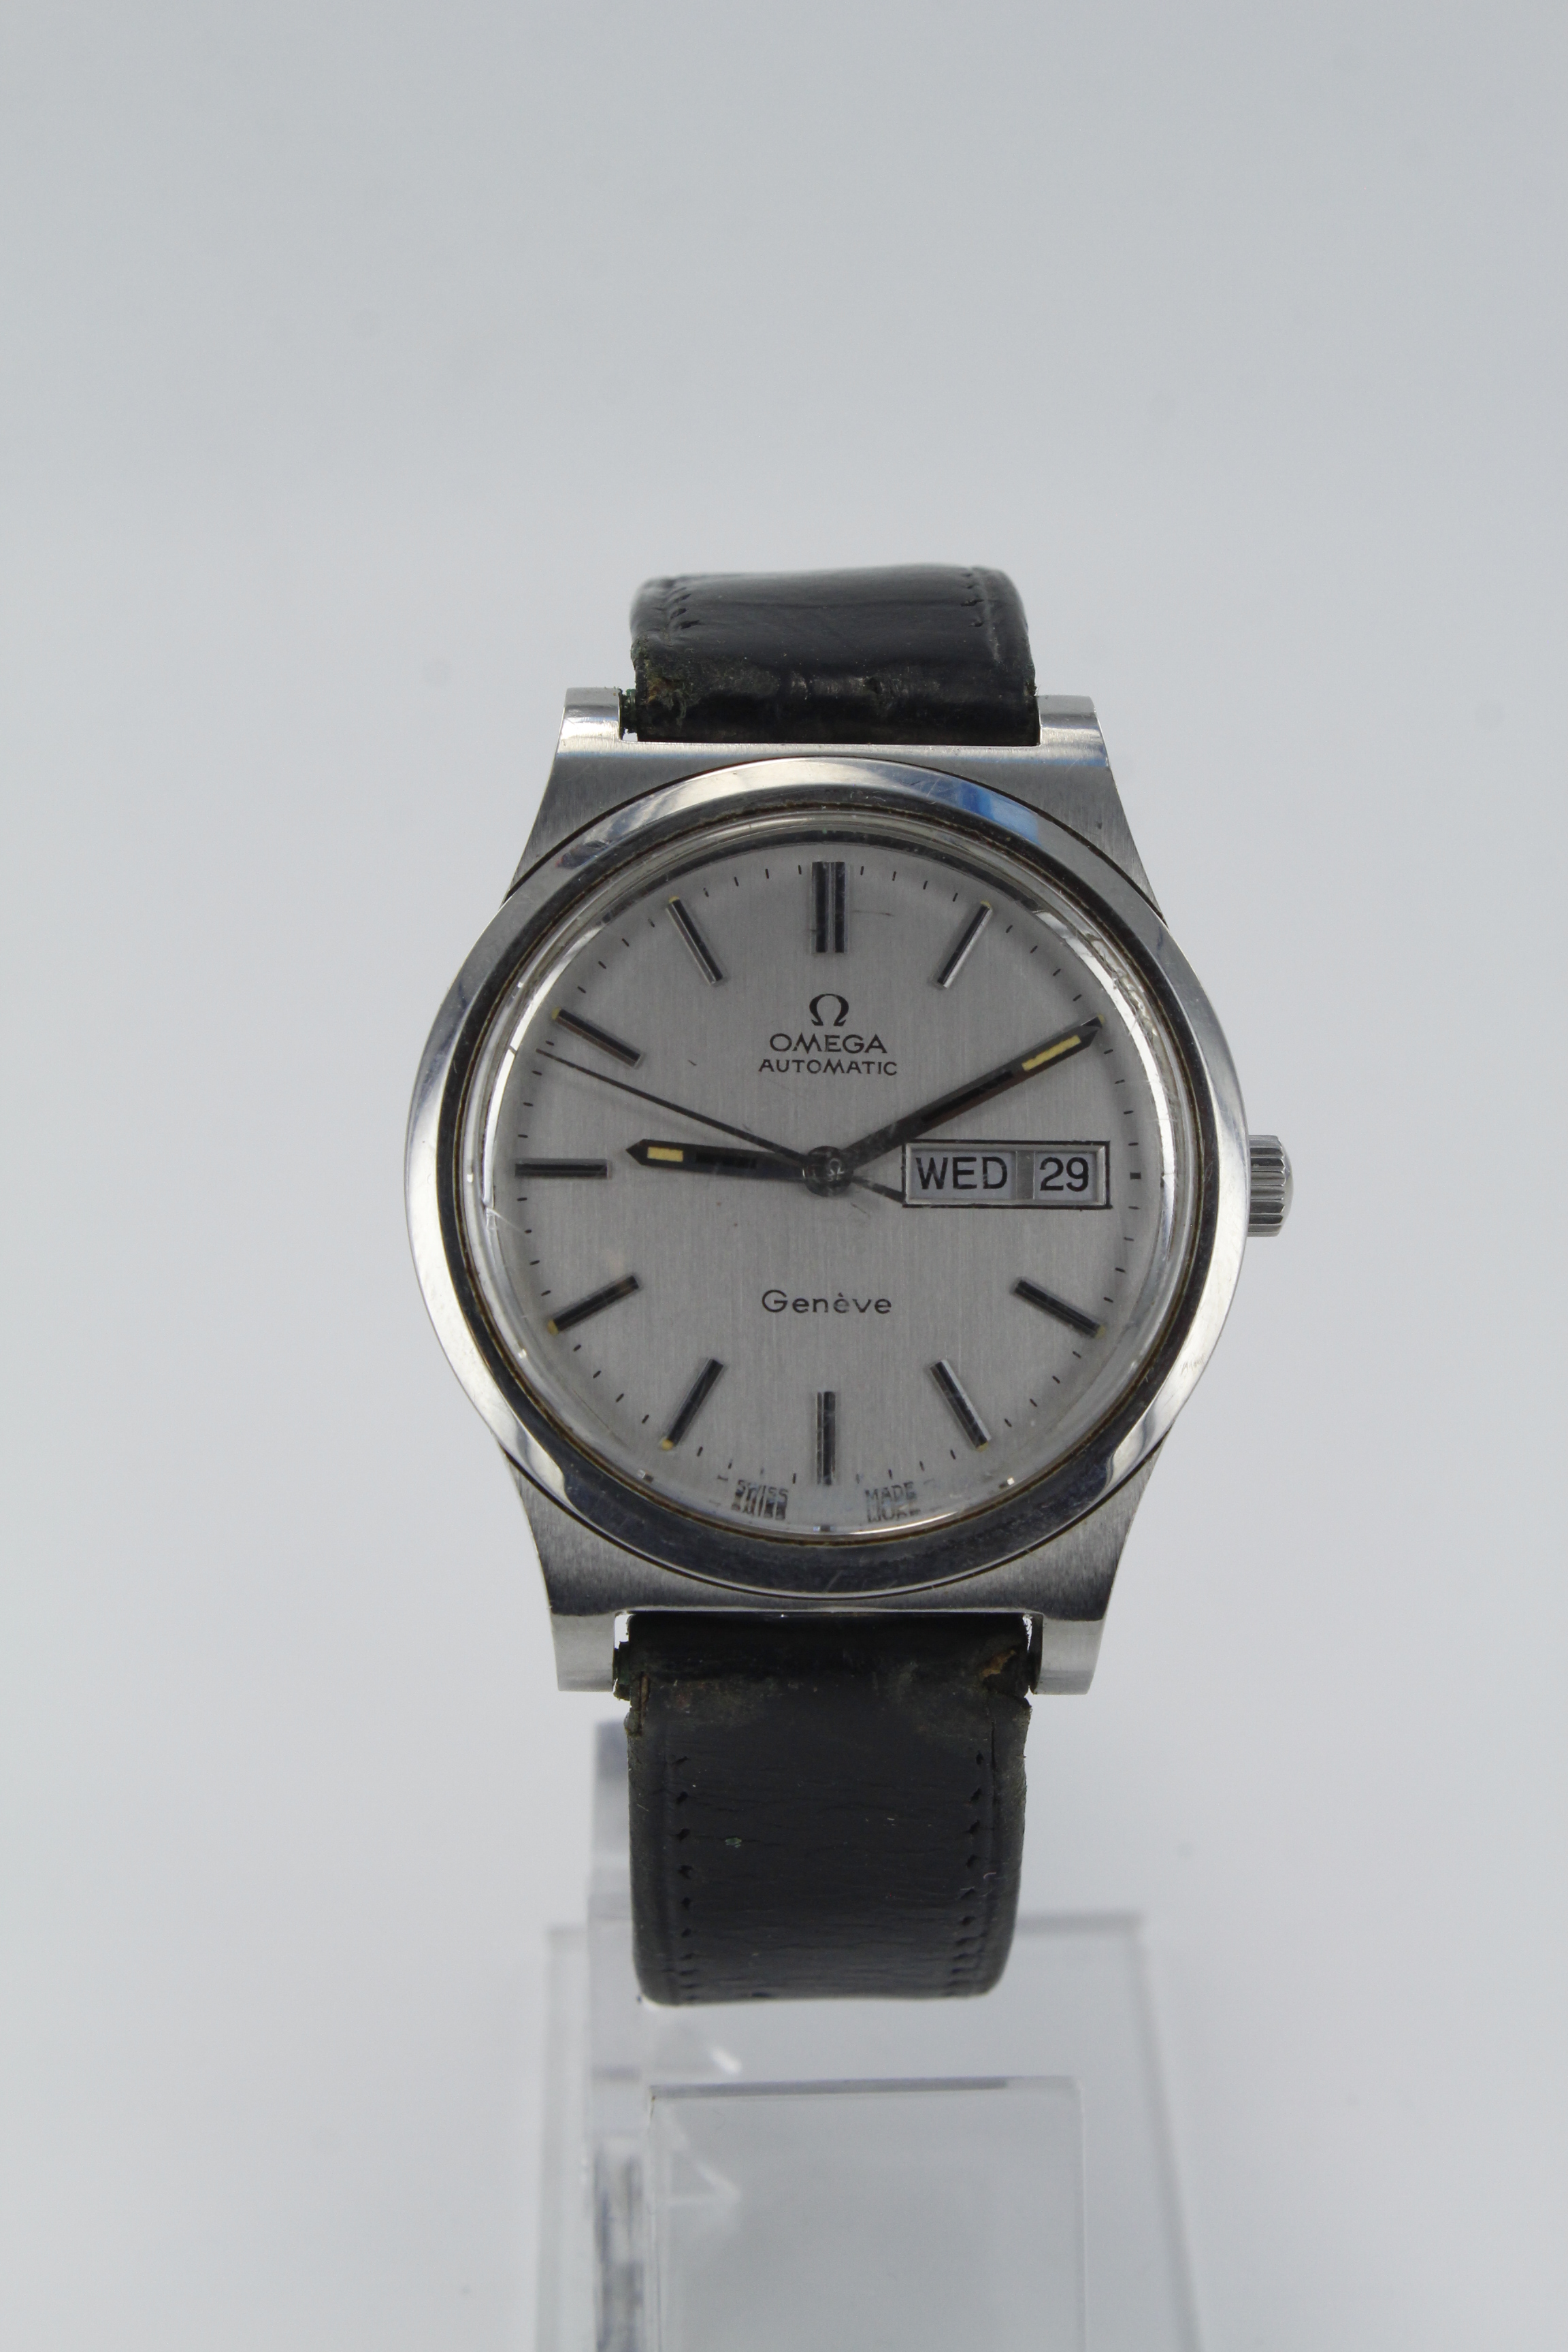 Gents stainless steel cased Omega automatic wristwatch, ref. 166.0169, circa 1972. The silver dial